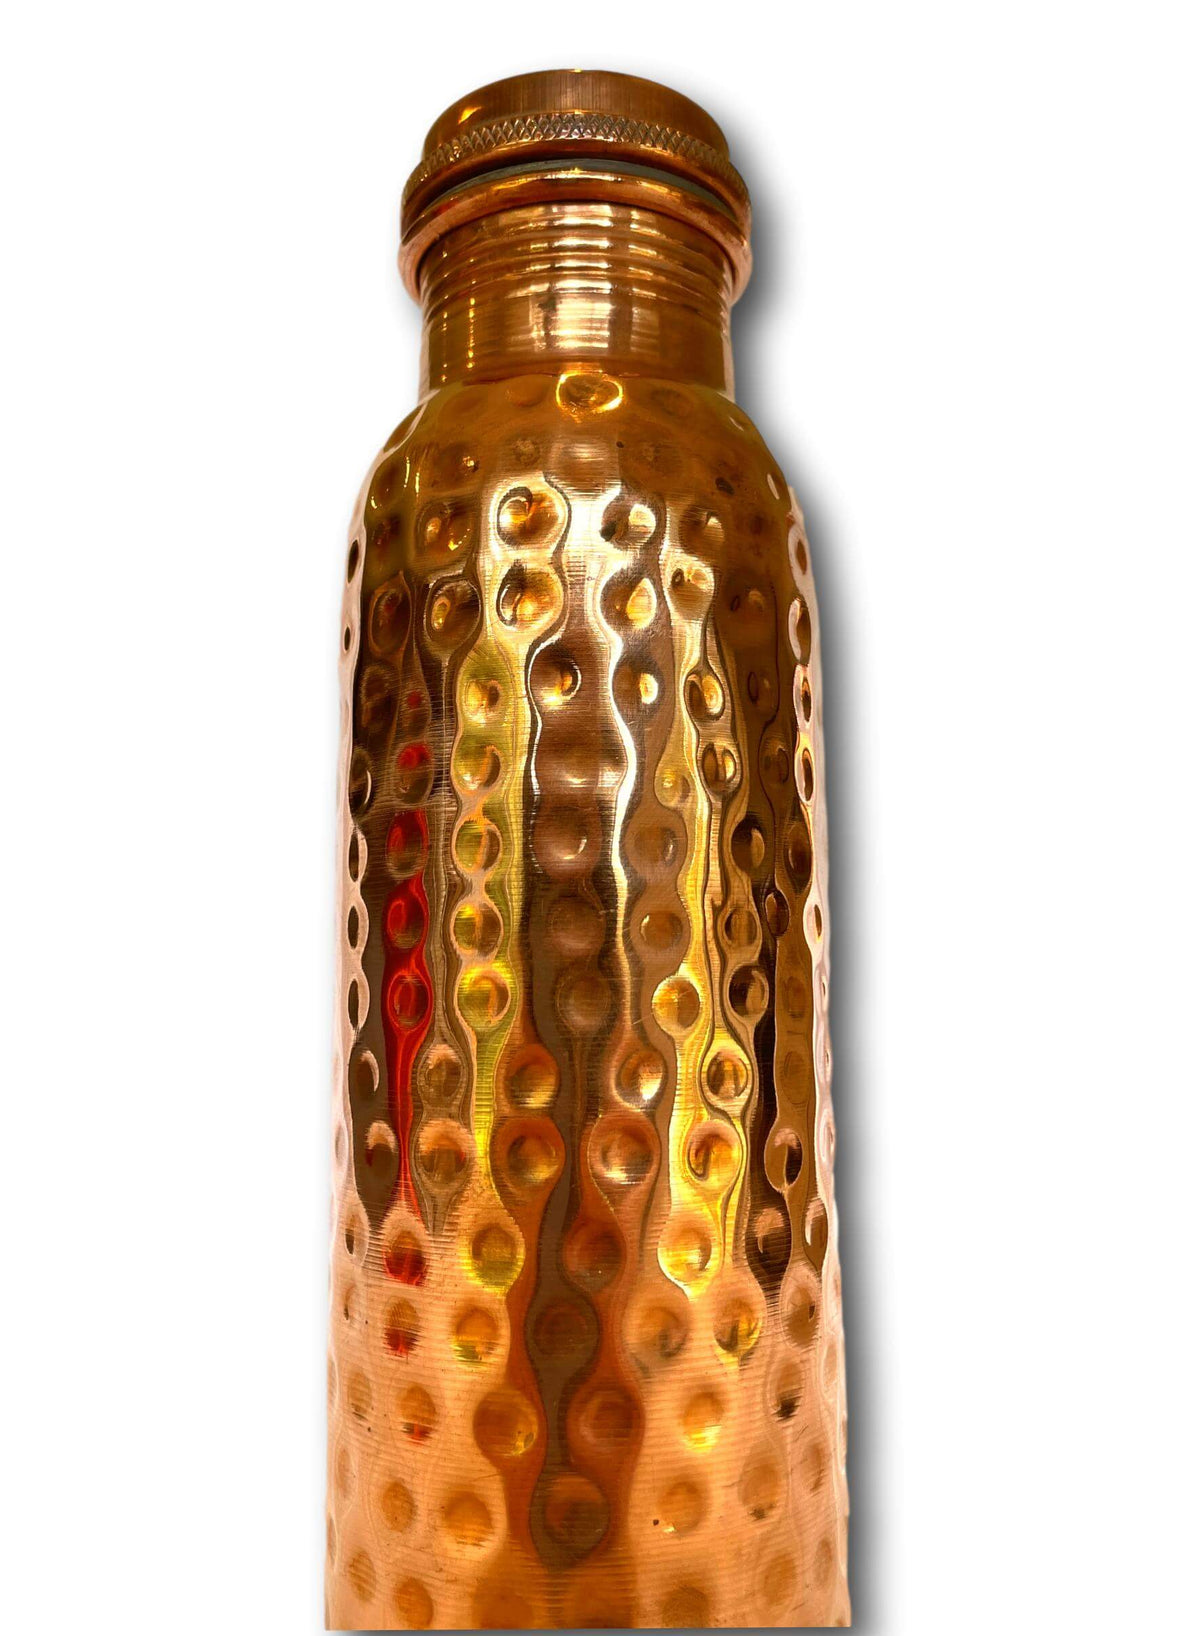 1L AYURVEDIC PURE COPPER WATER BOTTLE - TRADITIONALLY HANDMADE IN NEPAL 🇳🇵 + SINGING BOWLS AND MEDITATION